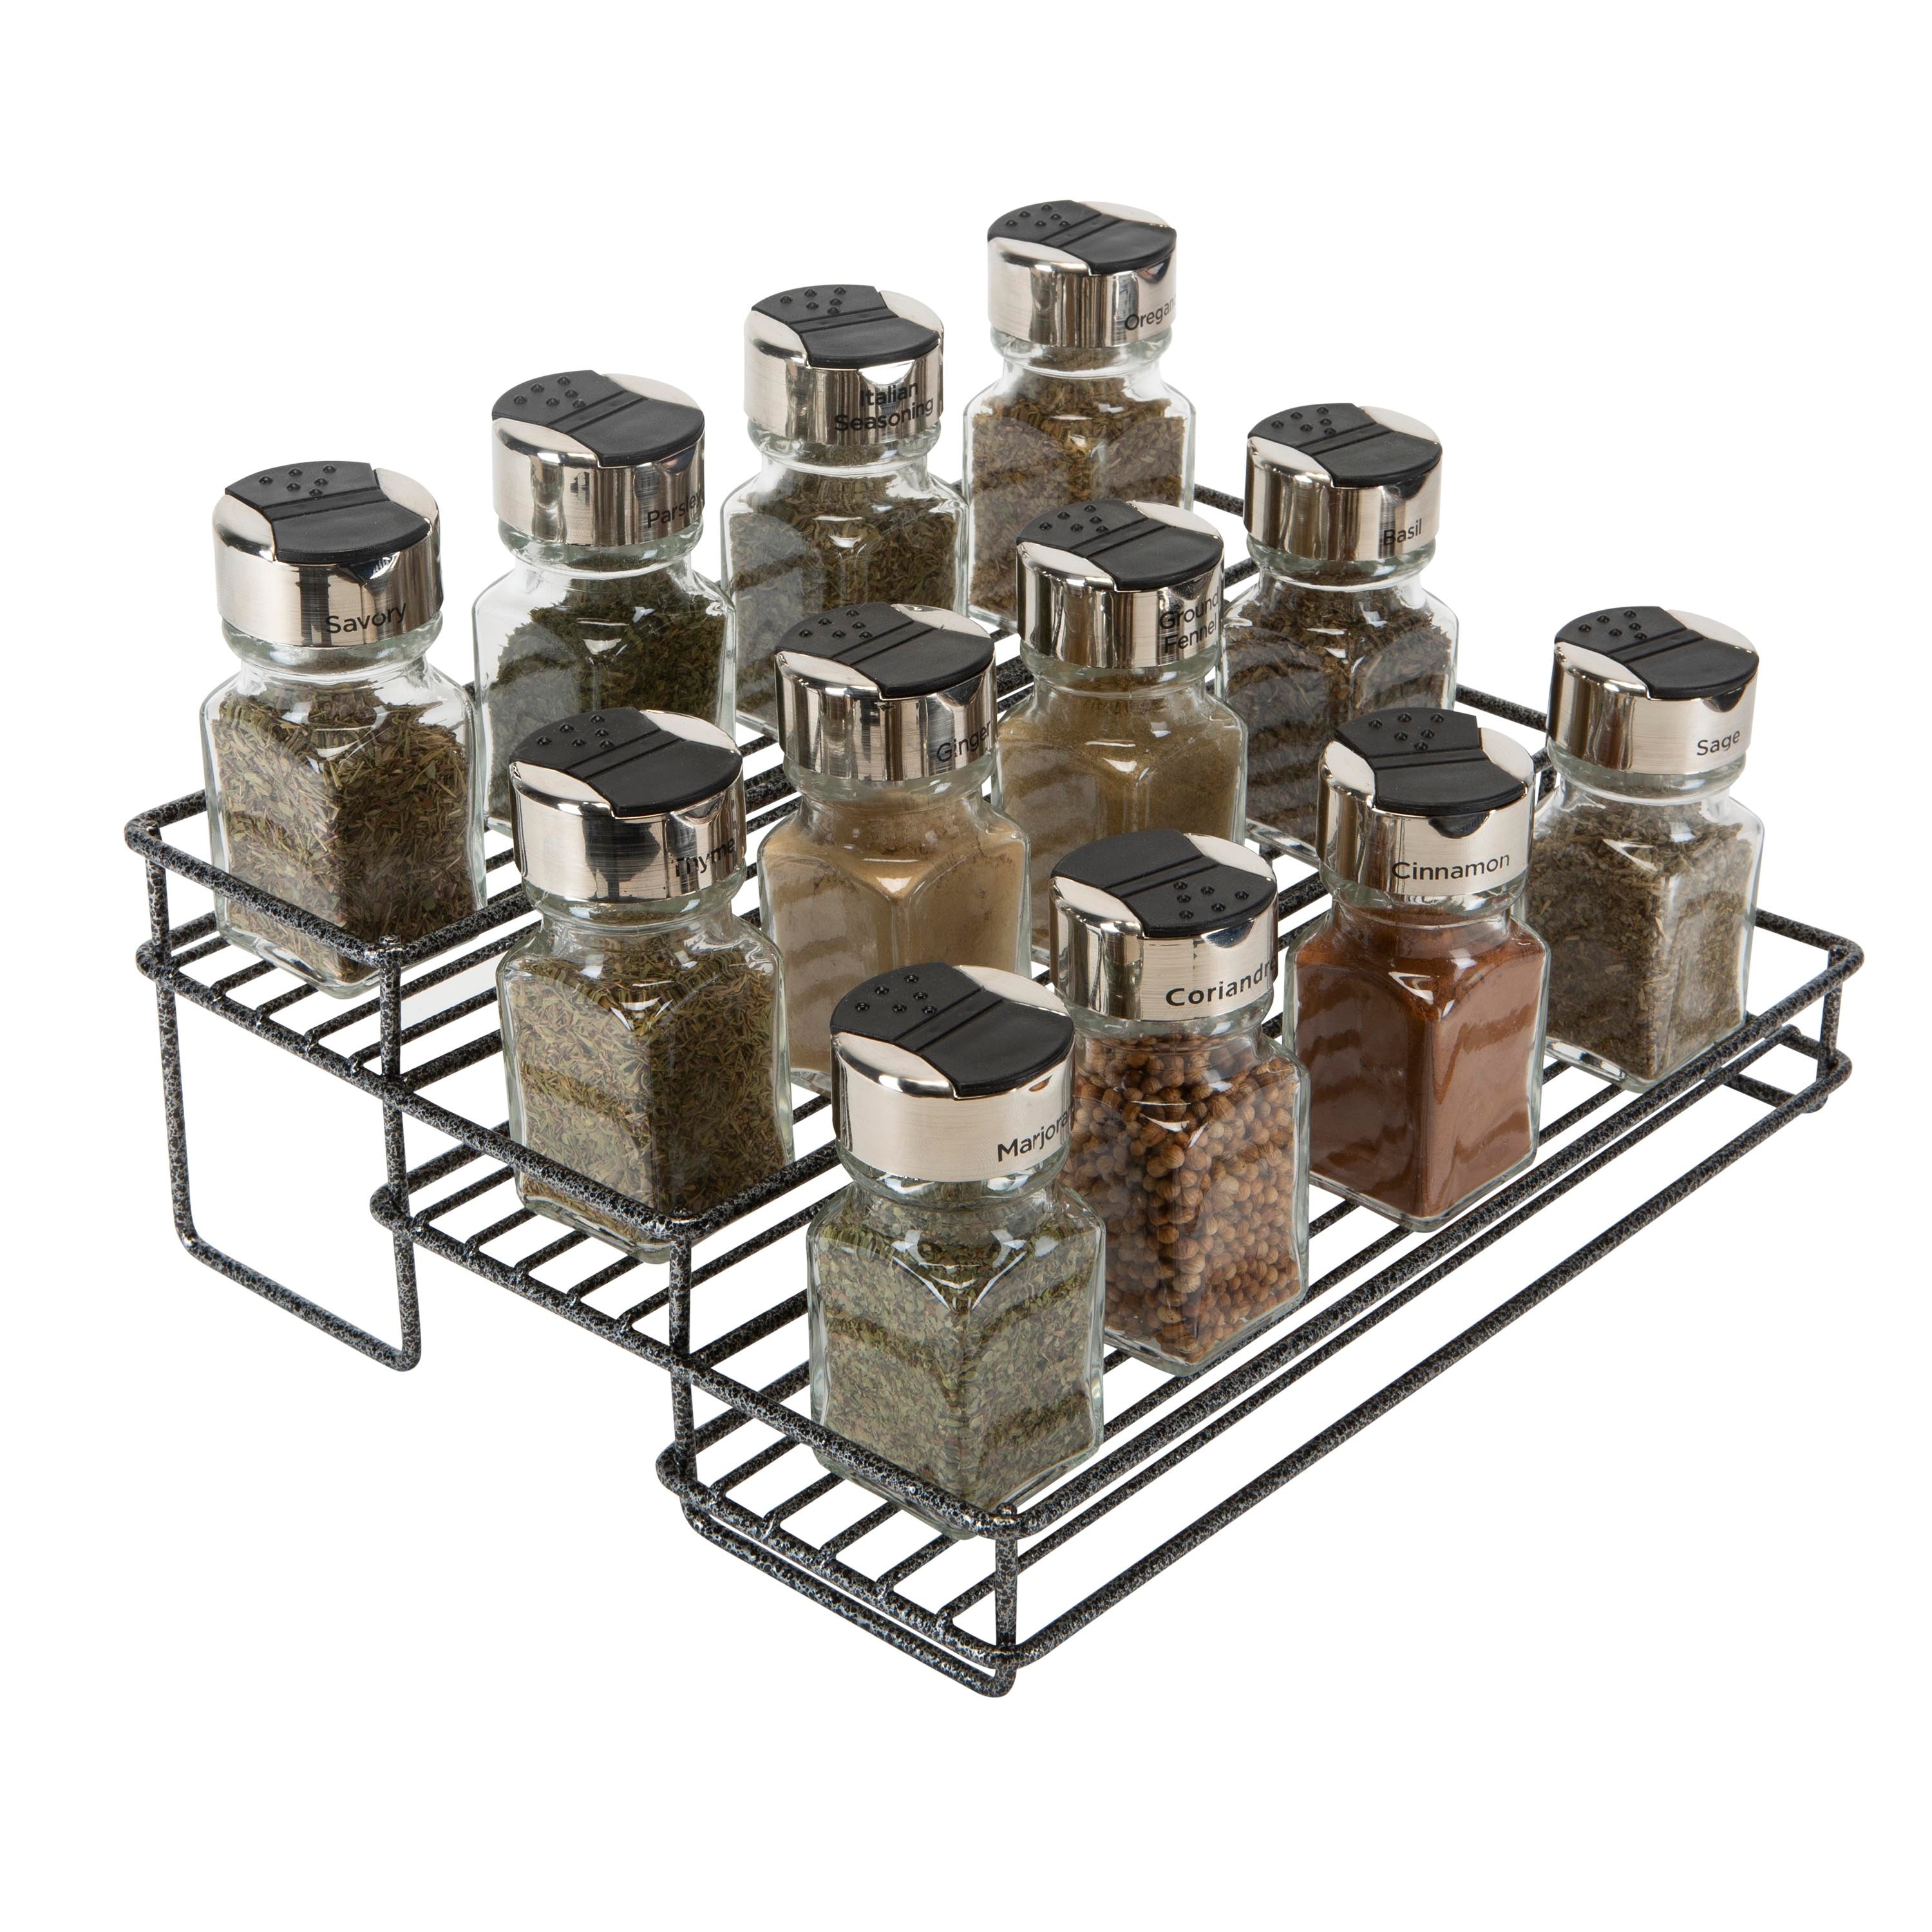 https://ak1.ostkcdn.com/images/products/is/images/direct/92fa73afa30fa2c0c46edf1dffe460e5c907192e/Laura-Ashley-Speckled-3-Tier-Spice-Rack-in-Grey.jpg